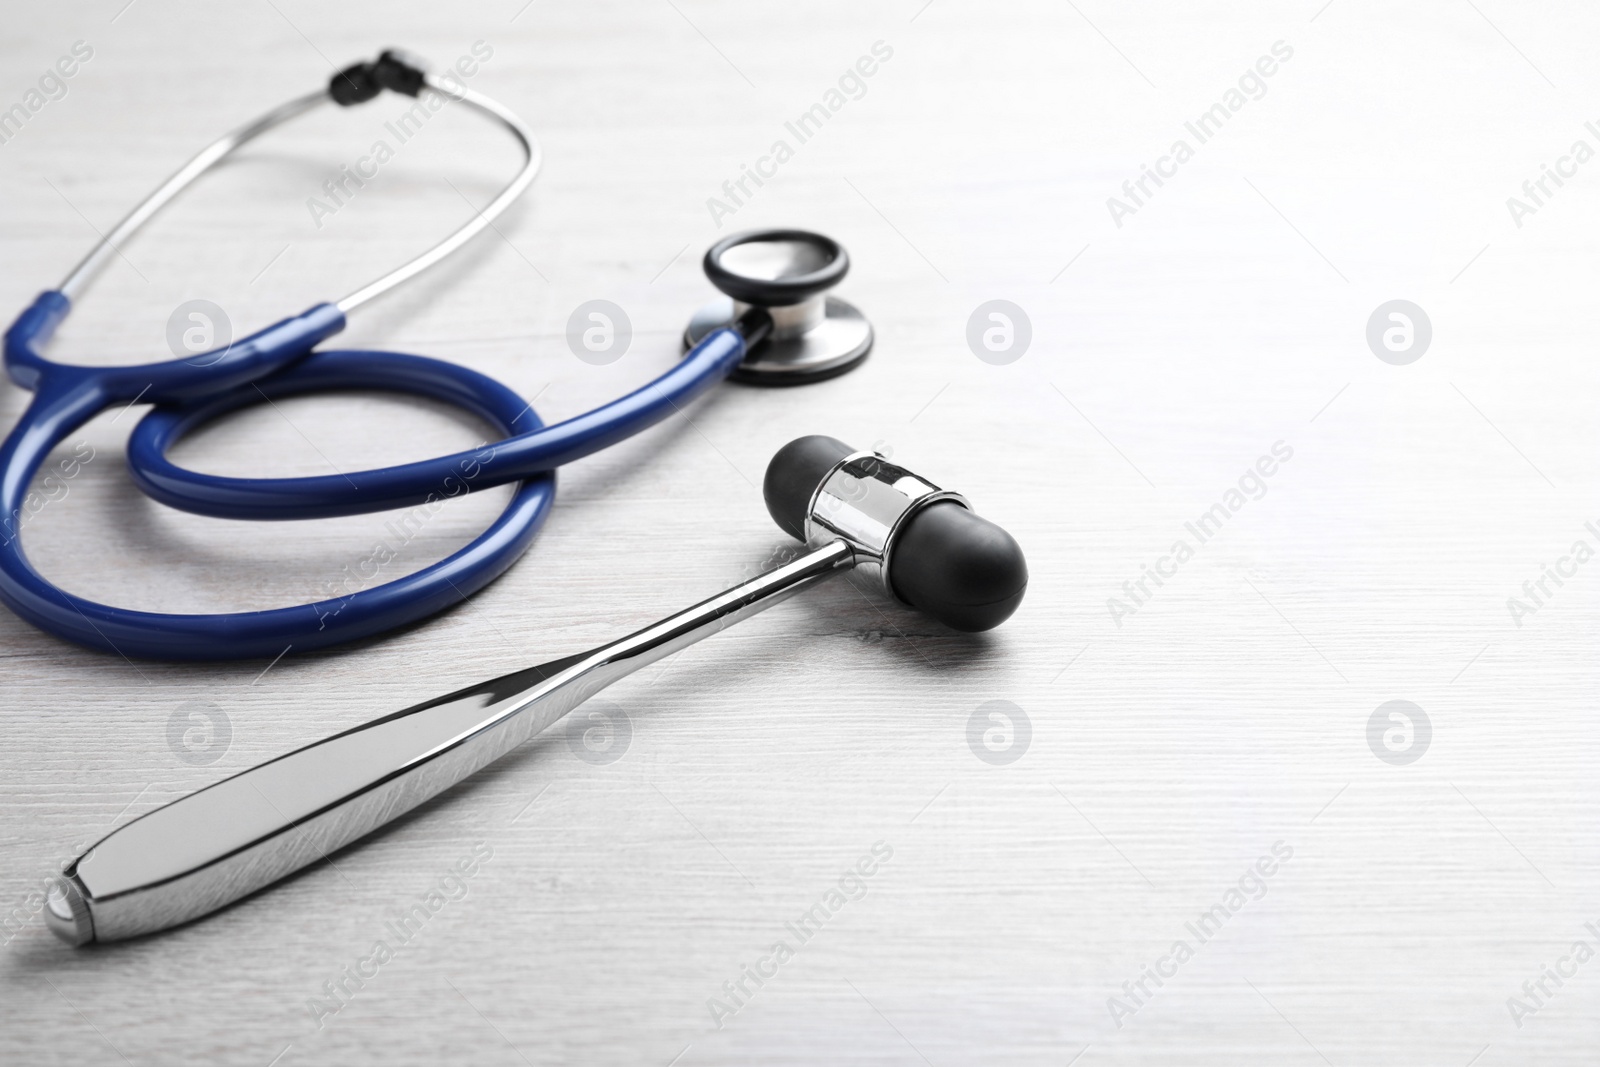 Photo of Reflex hammer with stethoscope on light wooden background, closeup. Nervous system diagnostic